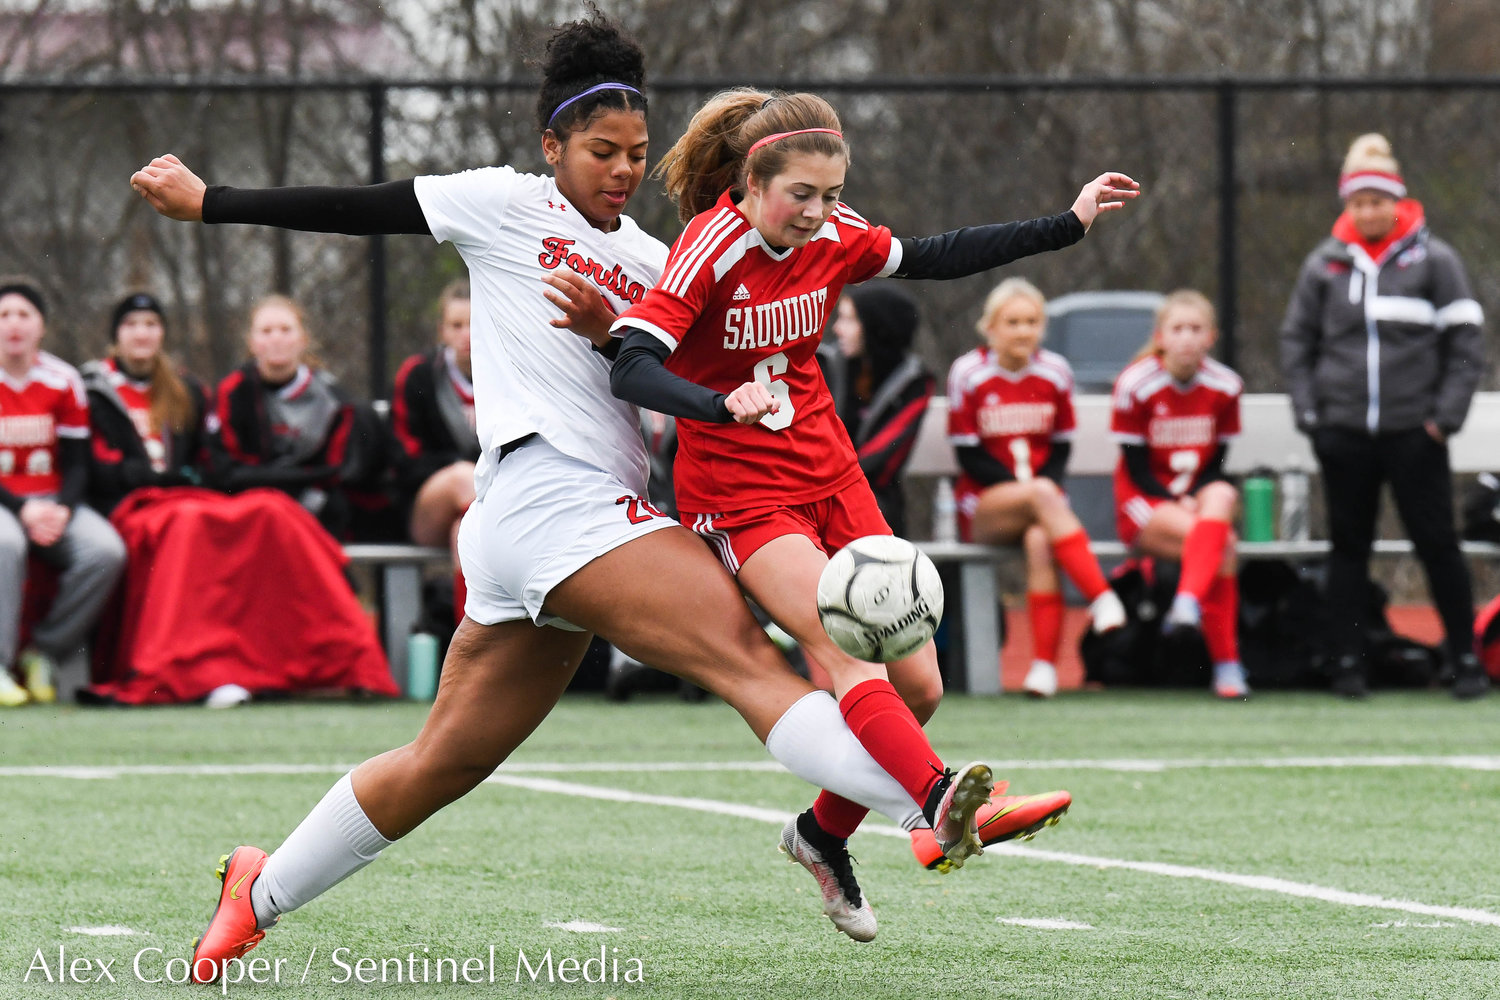 Sauquoit Valley player Kaitlyn Corr fights for control of the ball with a Waterford-Halfmoon player during the Class C state final on Sunday at Cortland High School. The Indians lost 6-3.